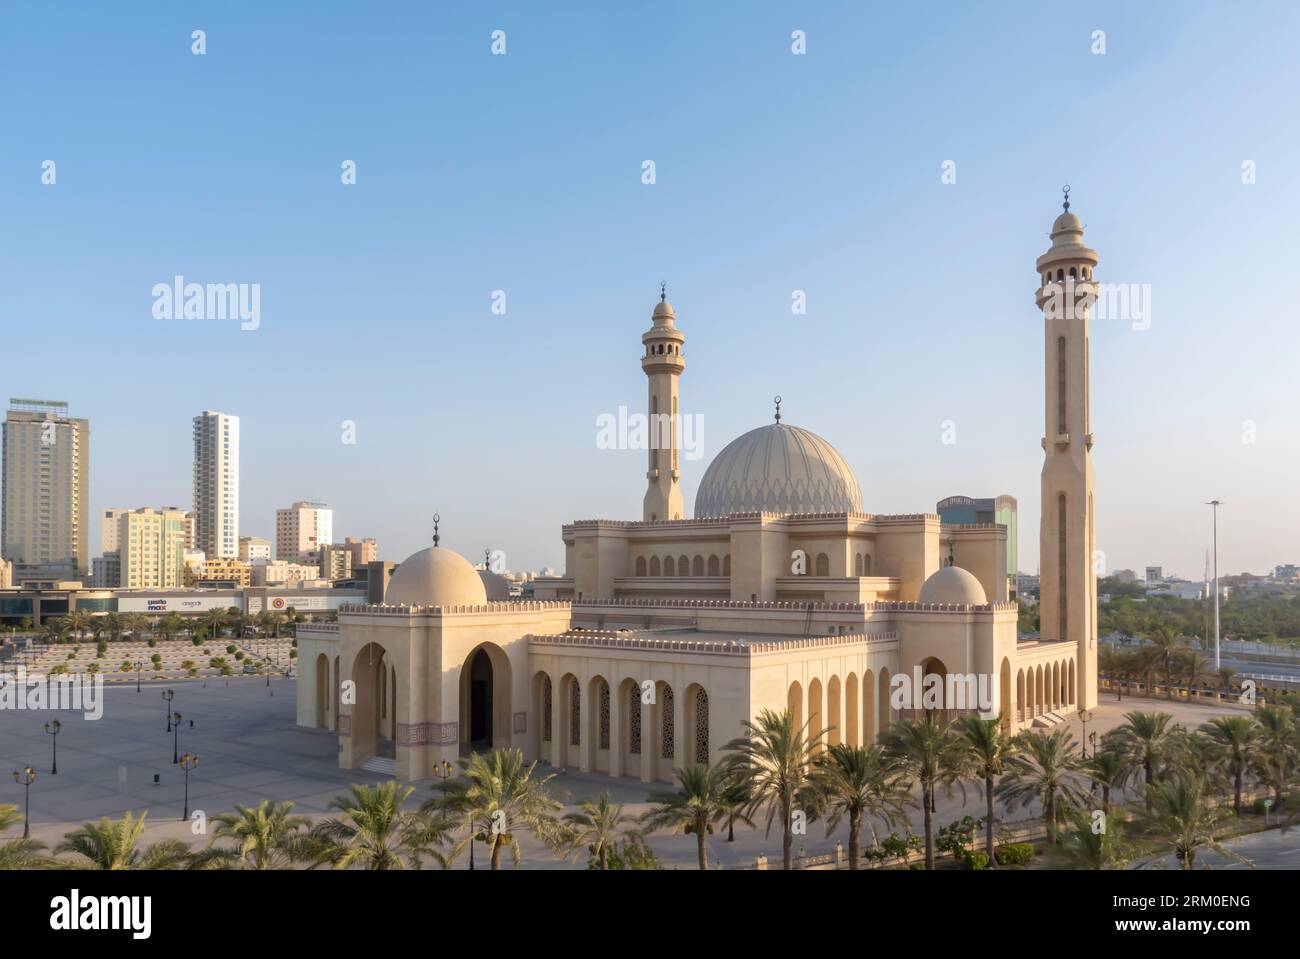 Al-Fateh Mosque Bahrain -  one of the largest mosques in the world Stock Photo